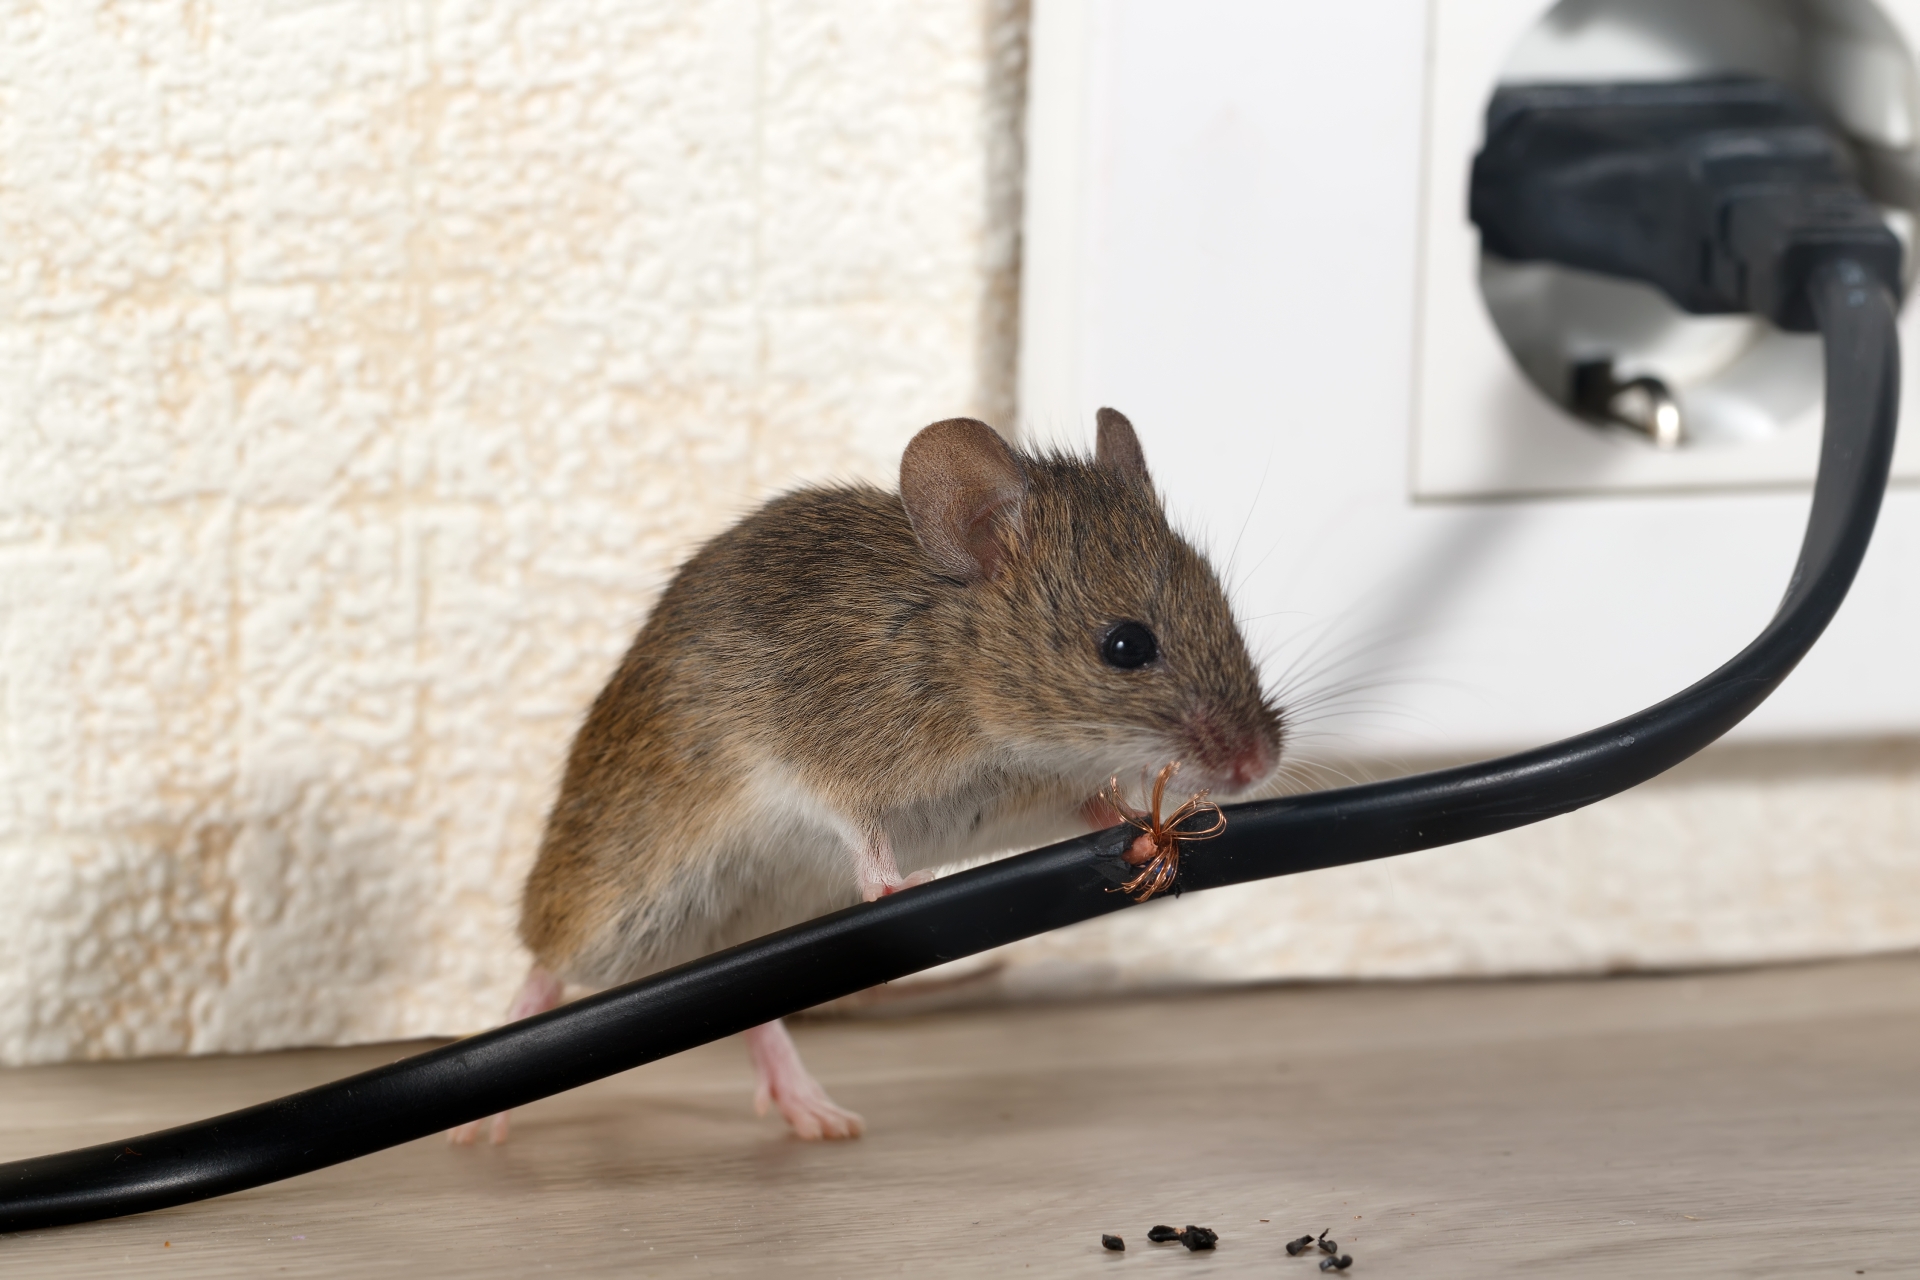 Mice Infestation, Pest Control in Beckenham, Elmers End, Park Langley, BR3. Call Now 020 8166 9746